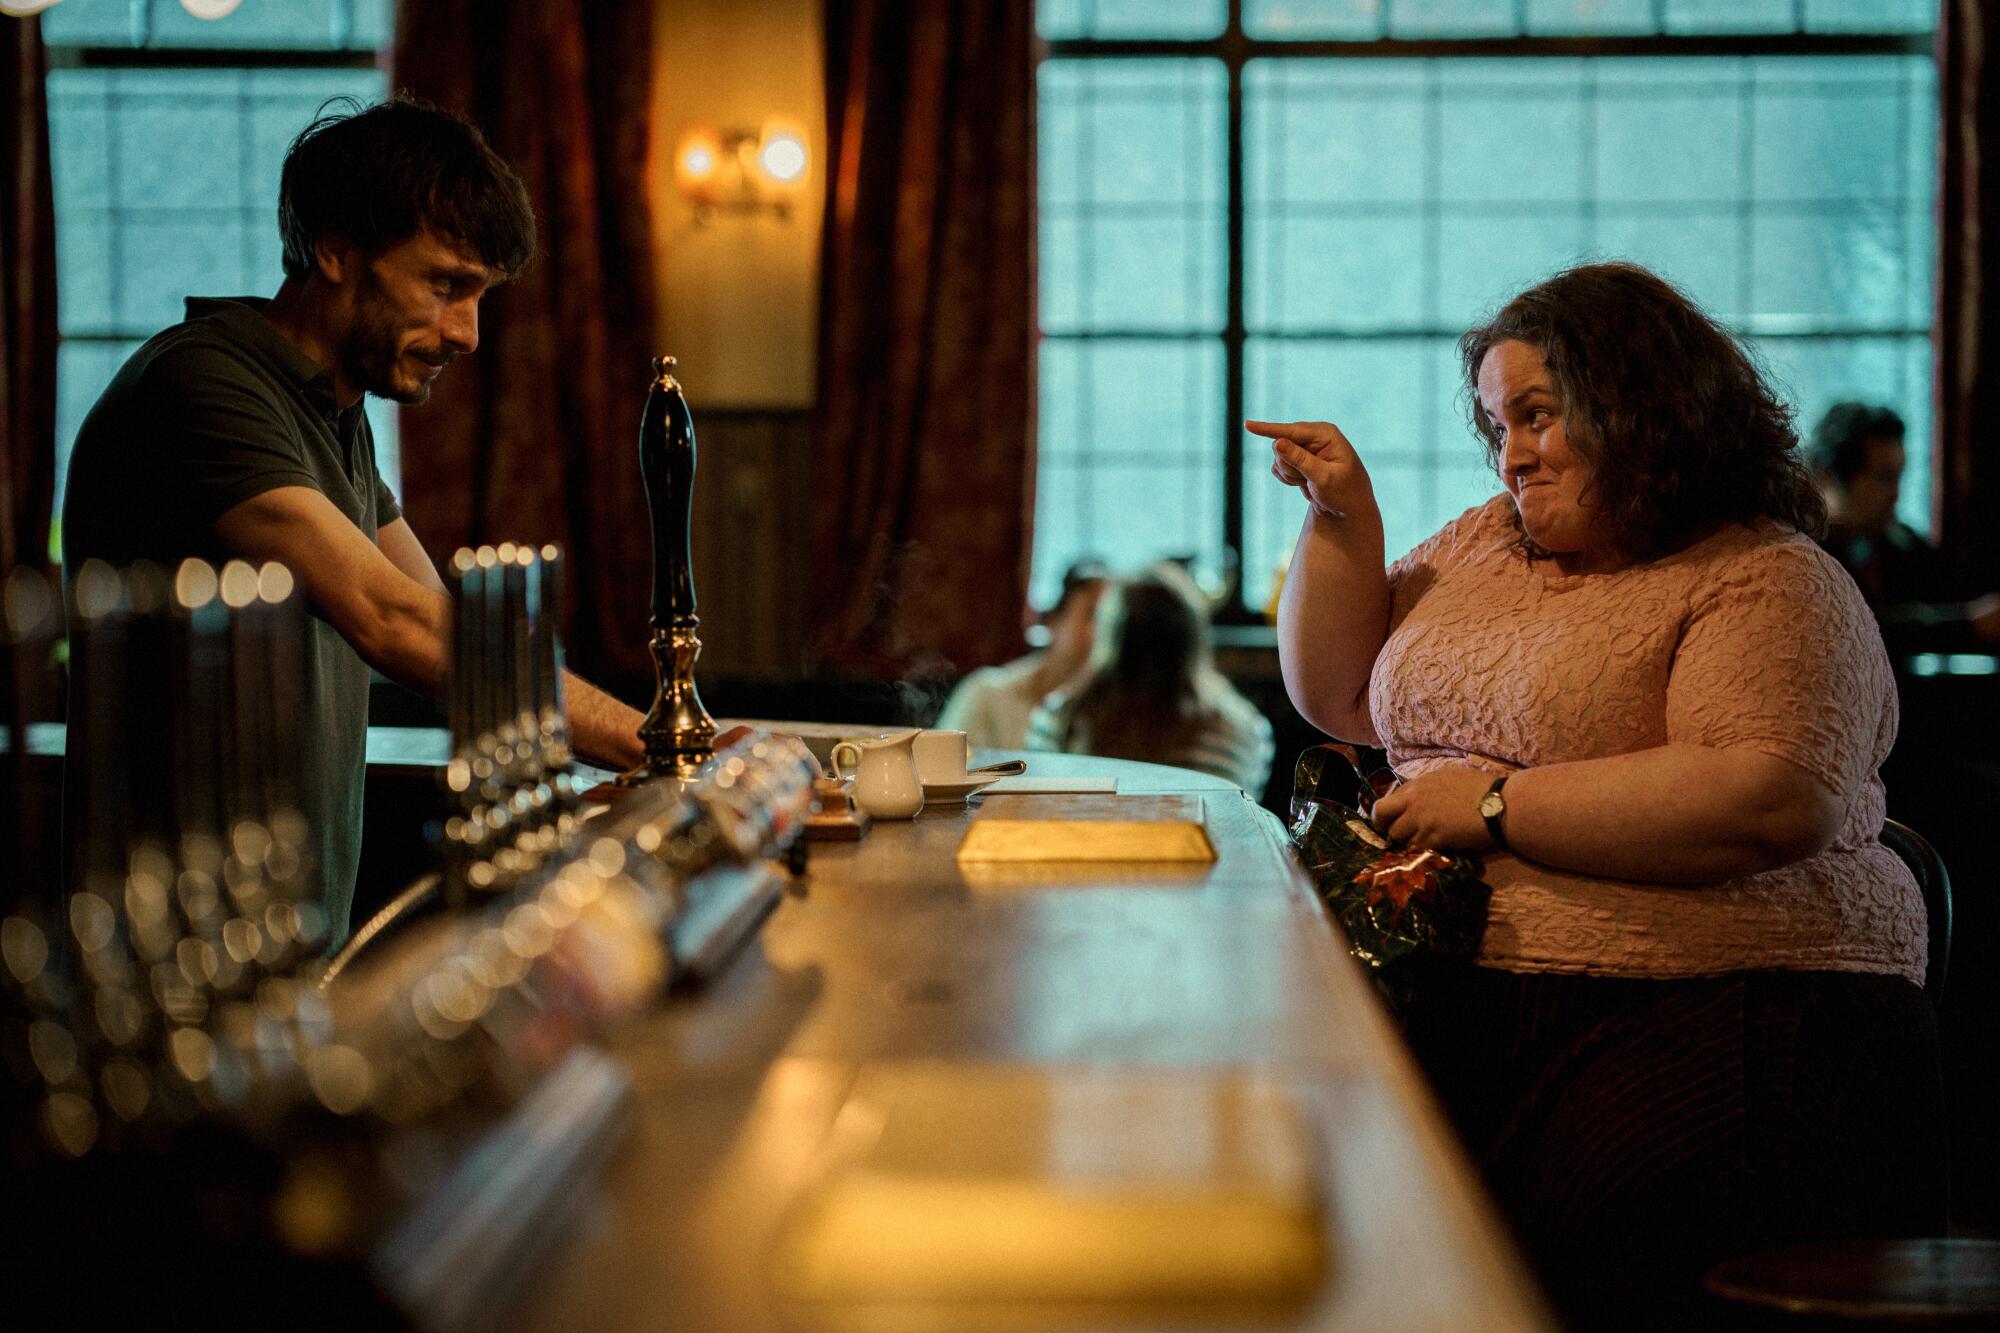 A bartender chats with a customer in a scene from "Baby Reindeer."